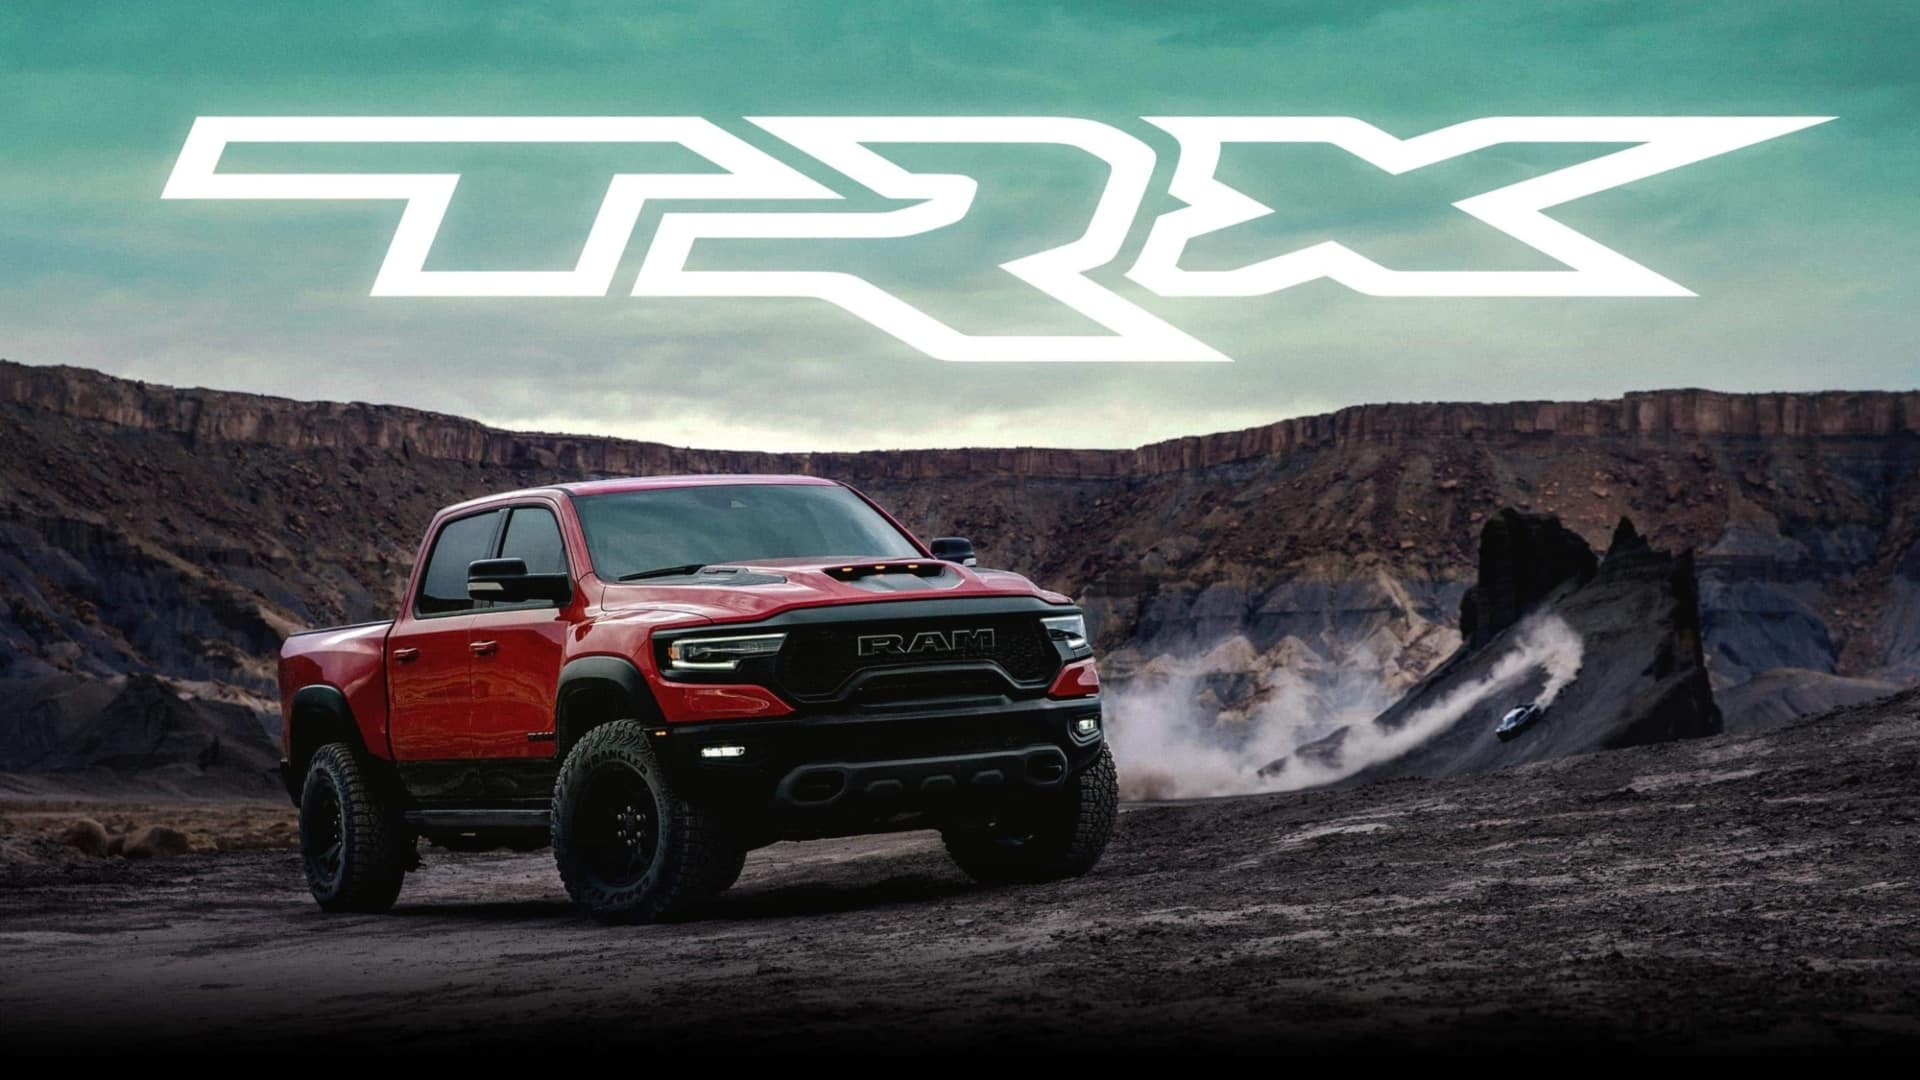 From Concept to Reality: The 2021 Ram 1500 TRX